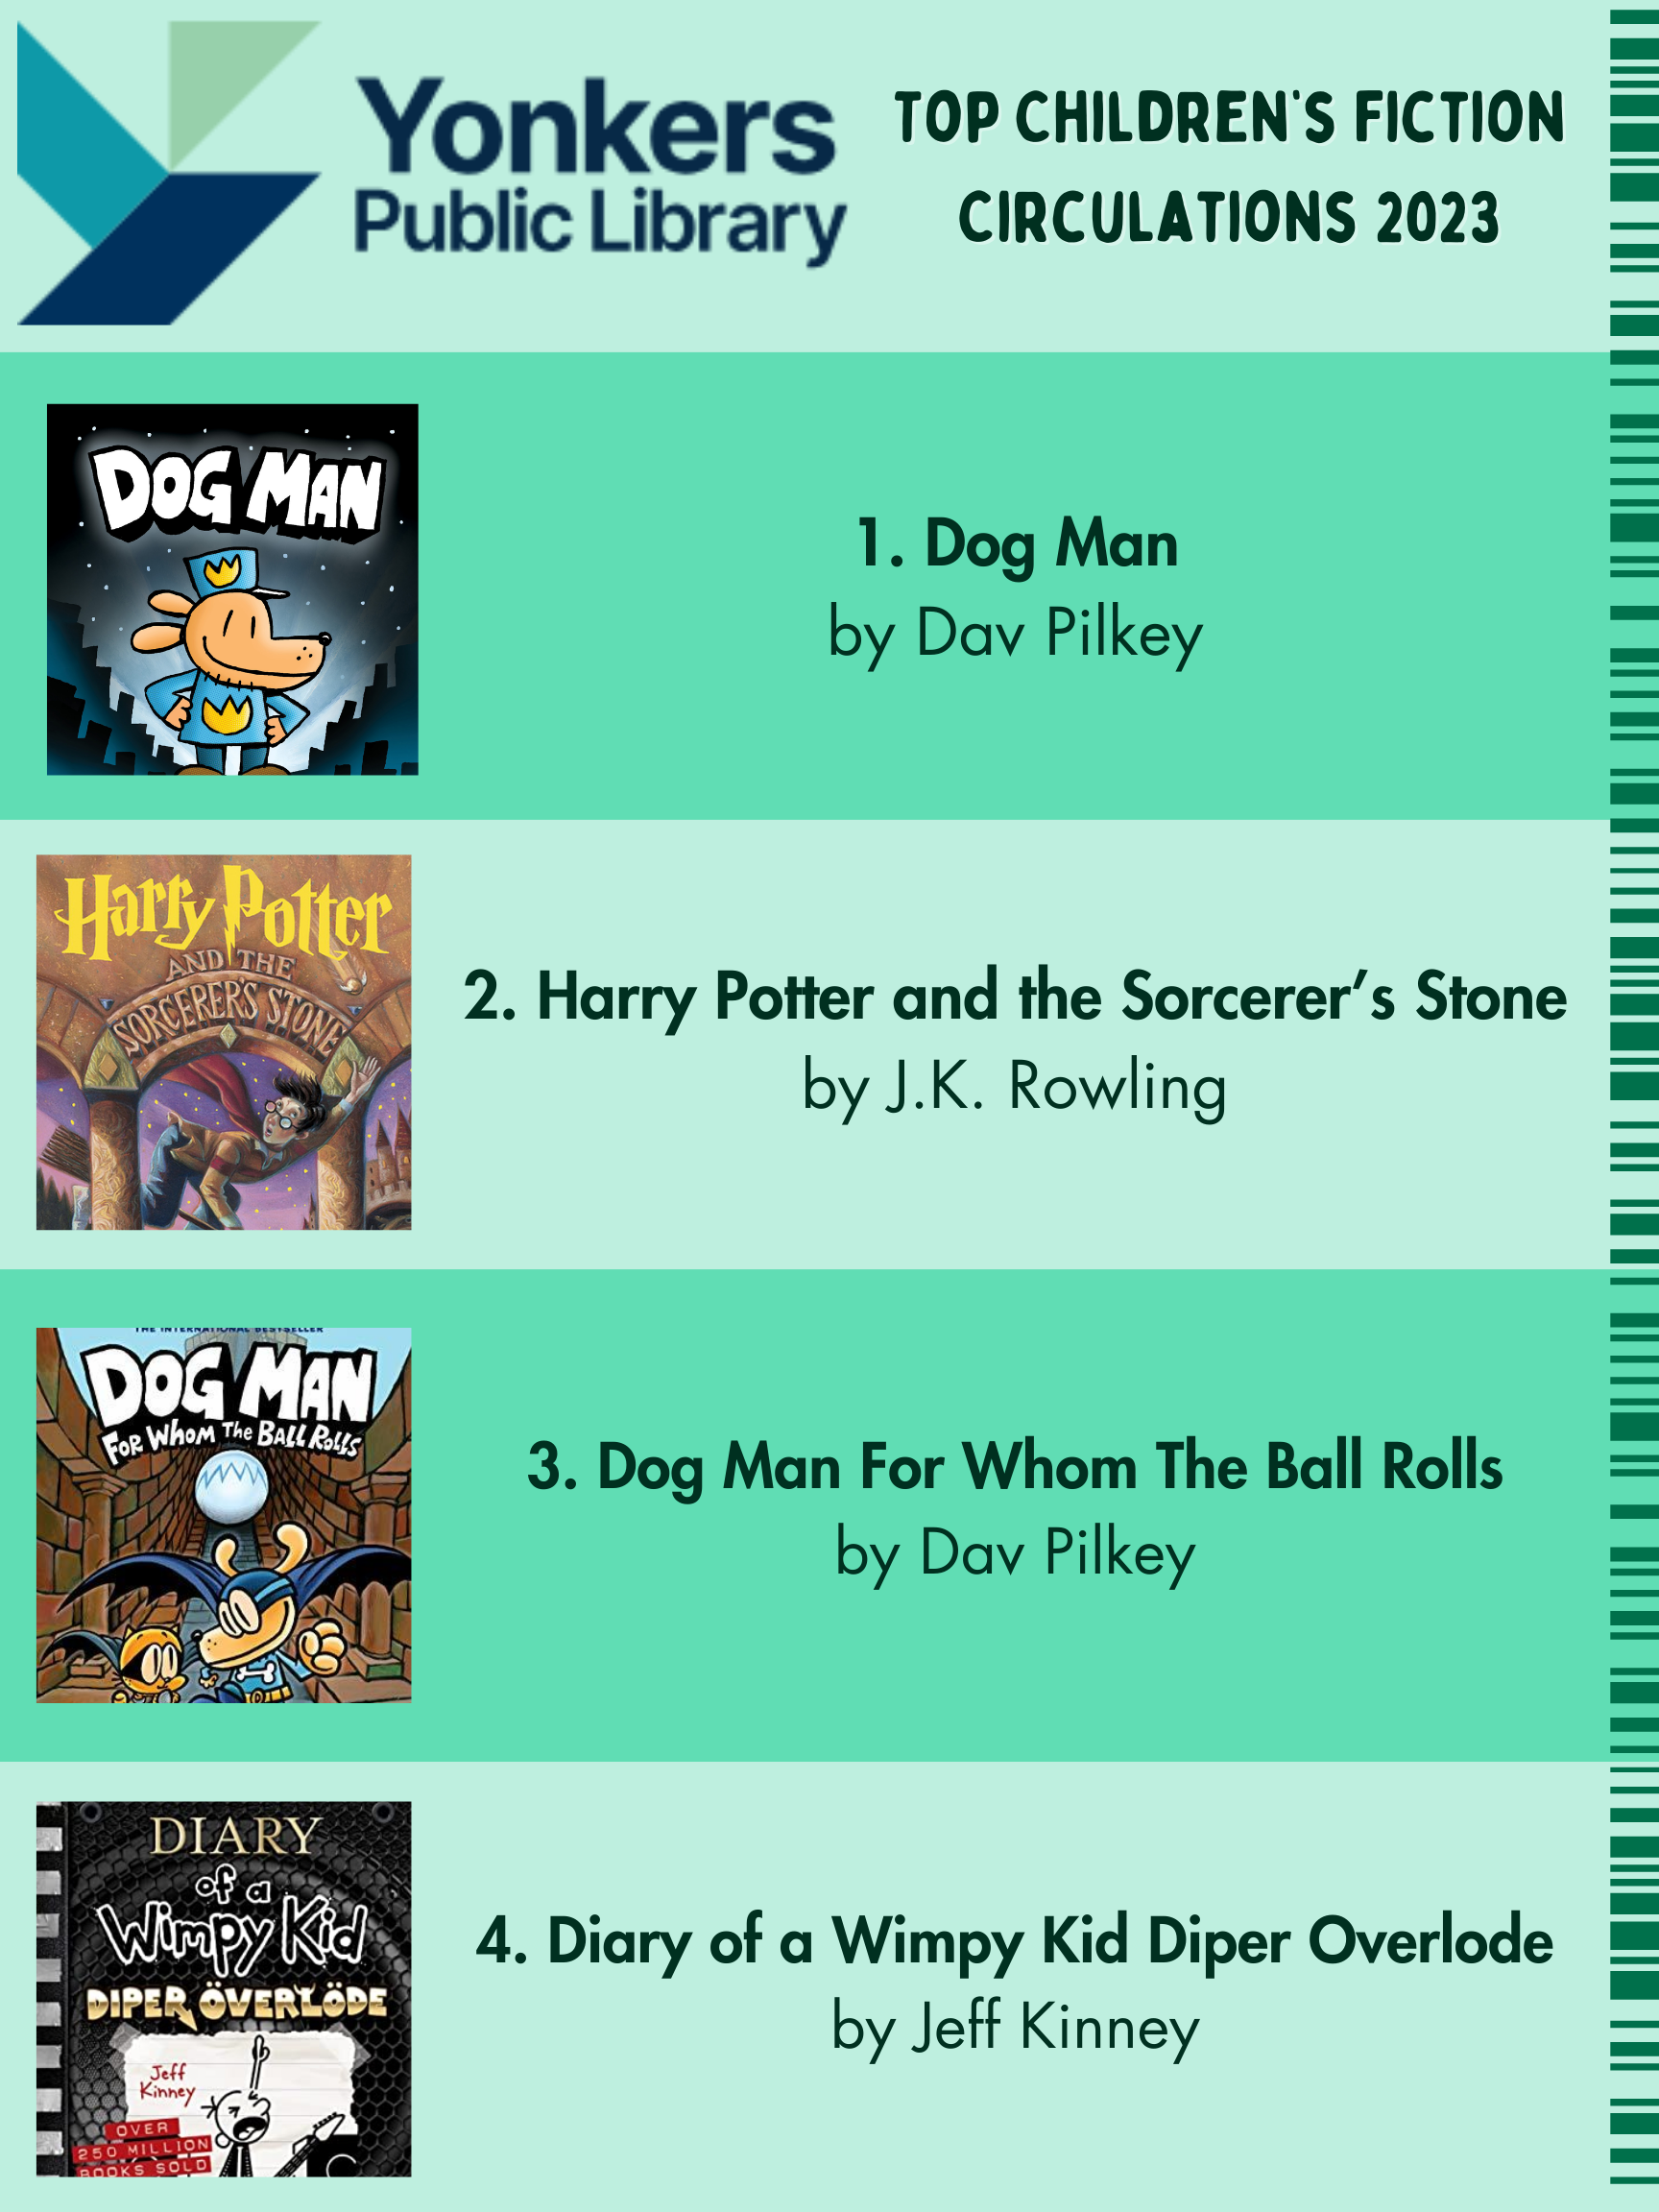 Top Children's Fiction Circulations 2023. Dog Man, Harry Potter and the Sorcerer's Stone, Dog Man For Who The Ball Rolls, and Diary of a Wimpy Kid: Diper Overlode.